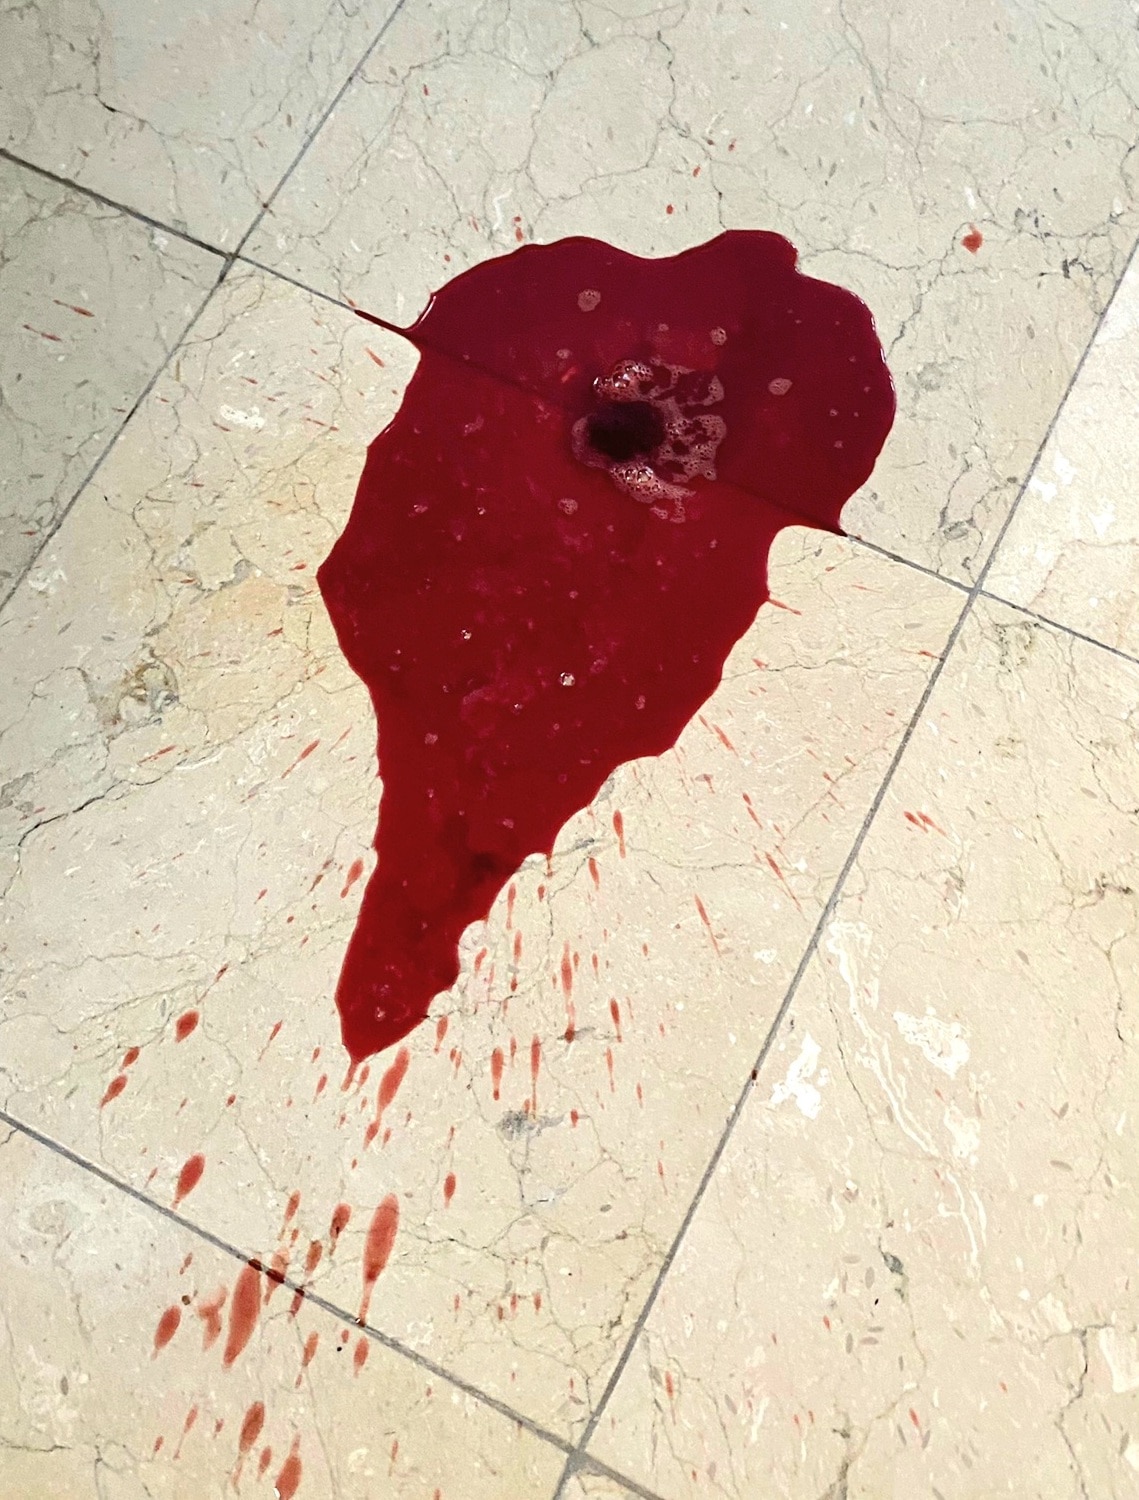 tile floor with pool of pure blood from dog poop